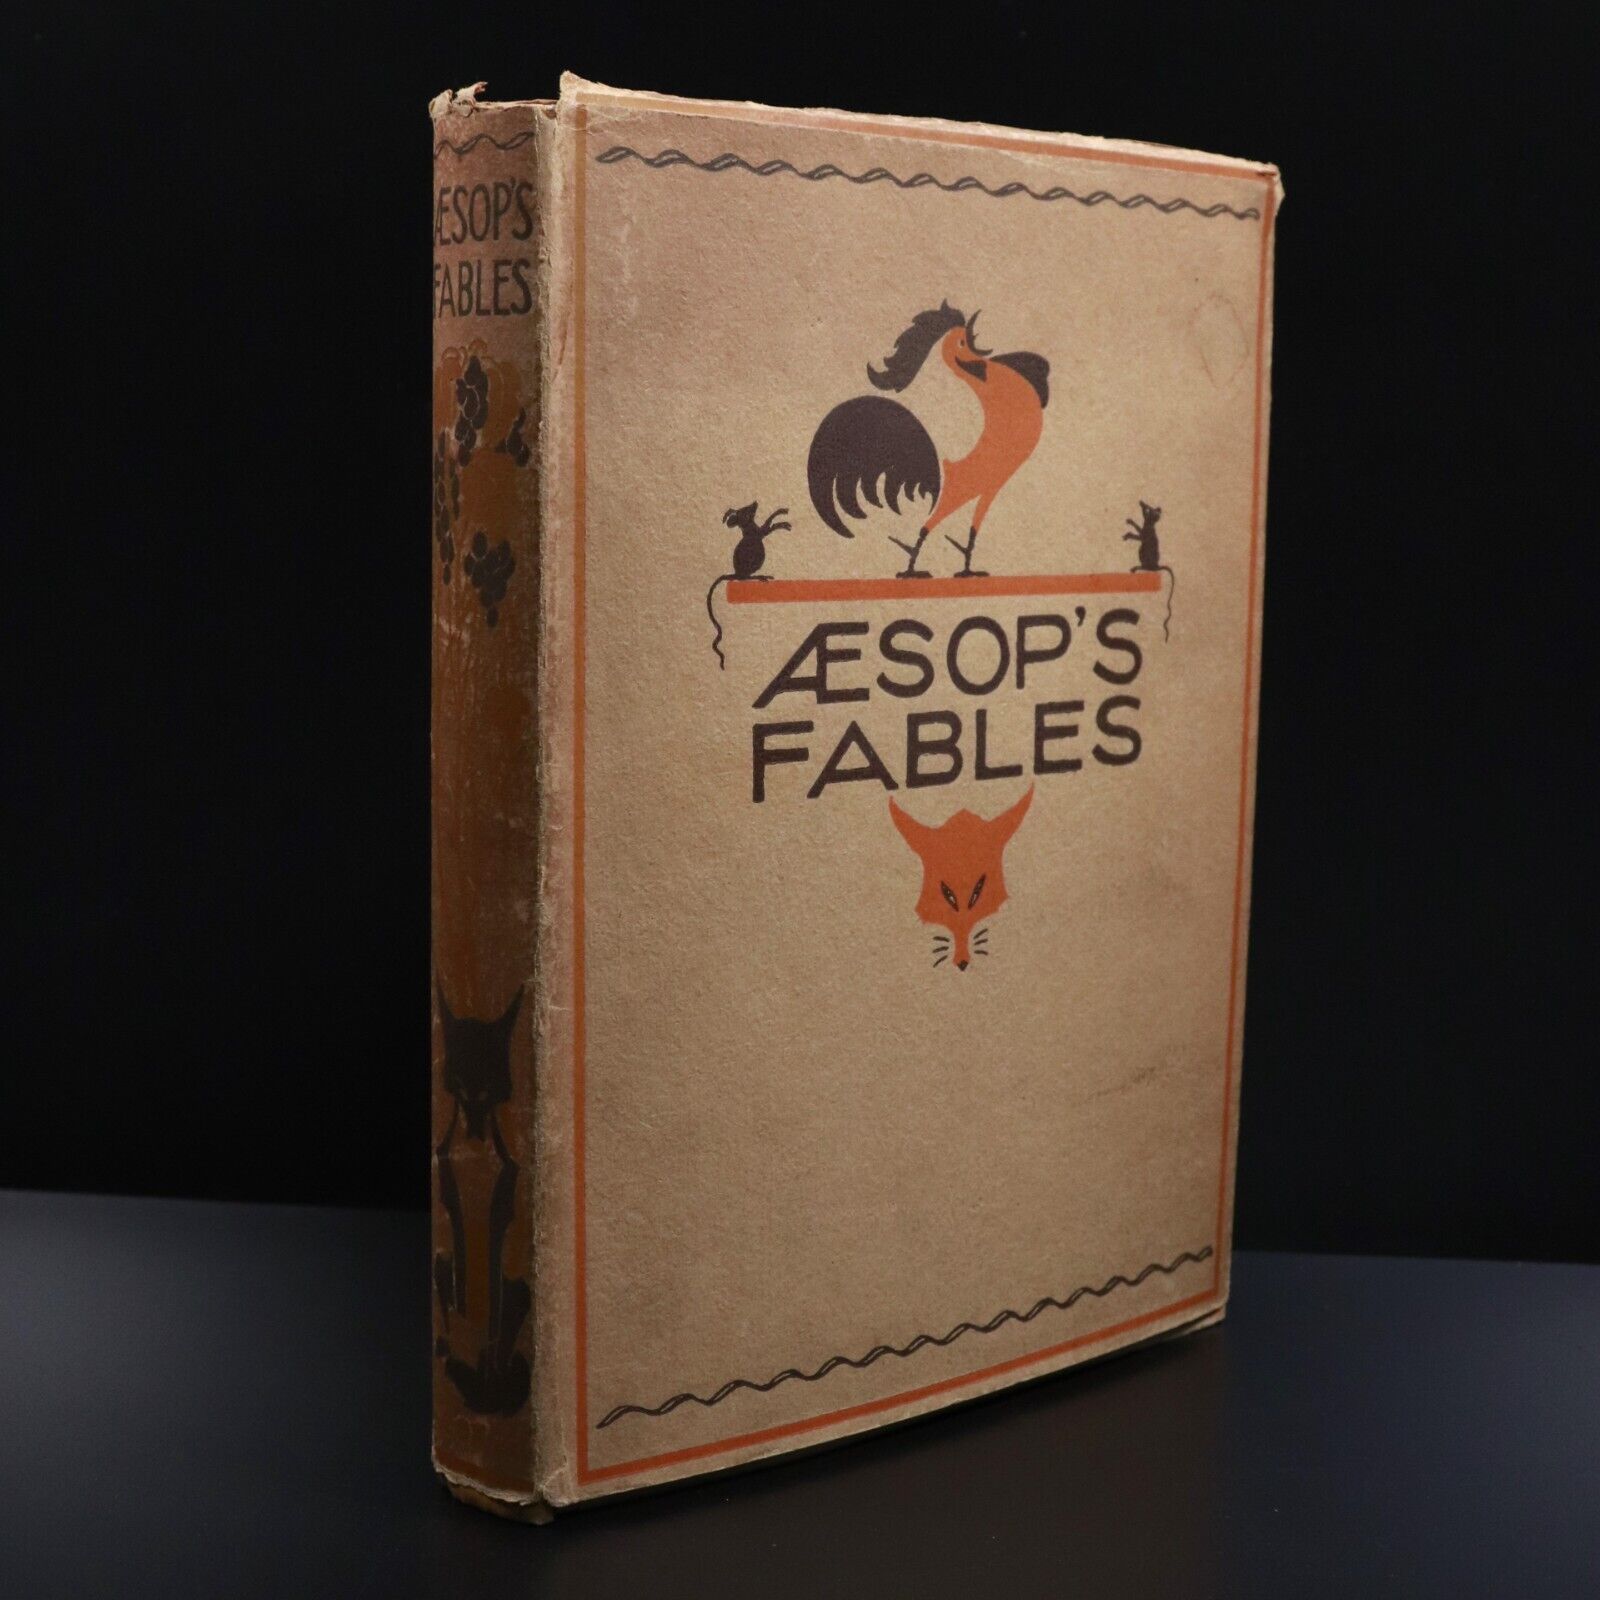 1930 Aesop's Fables Illustrated by Nora Fry Antique Childrens Book